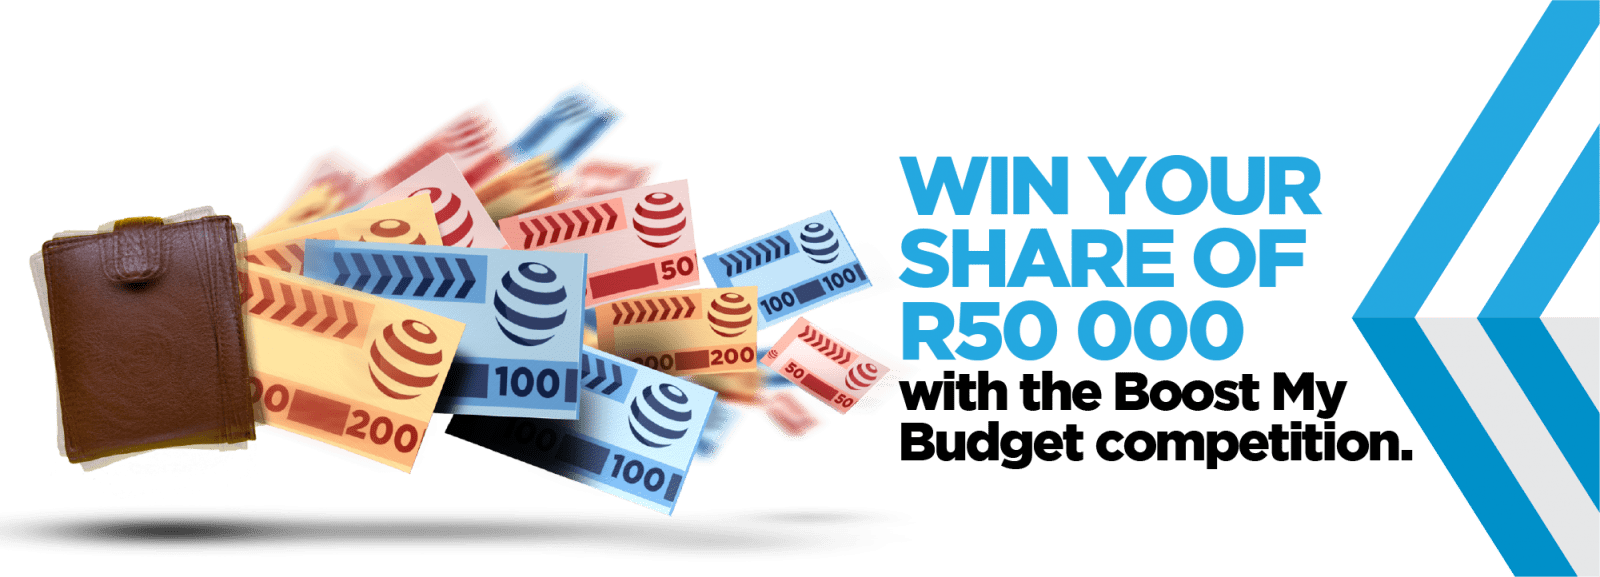 Win your share of R50000 with the Boost my Budget competition